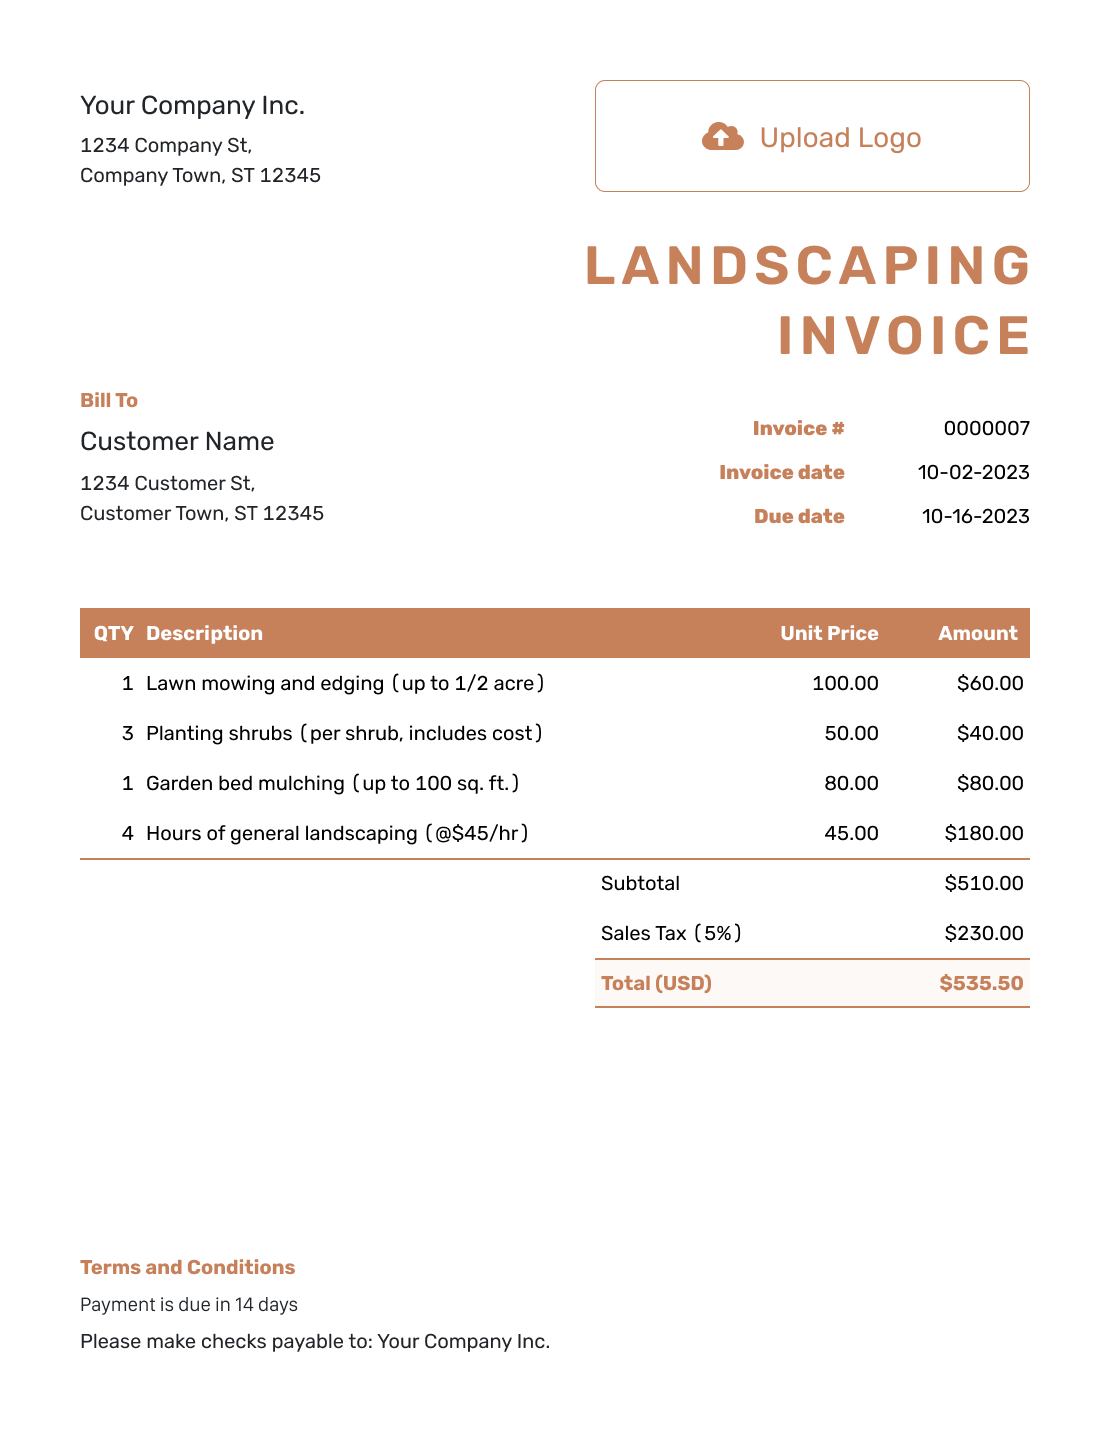 Standard Landscaping Invoice Template